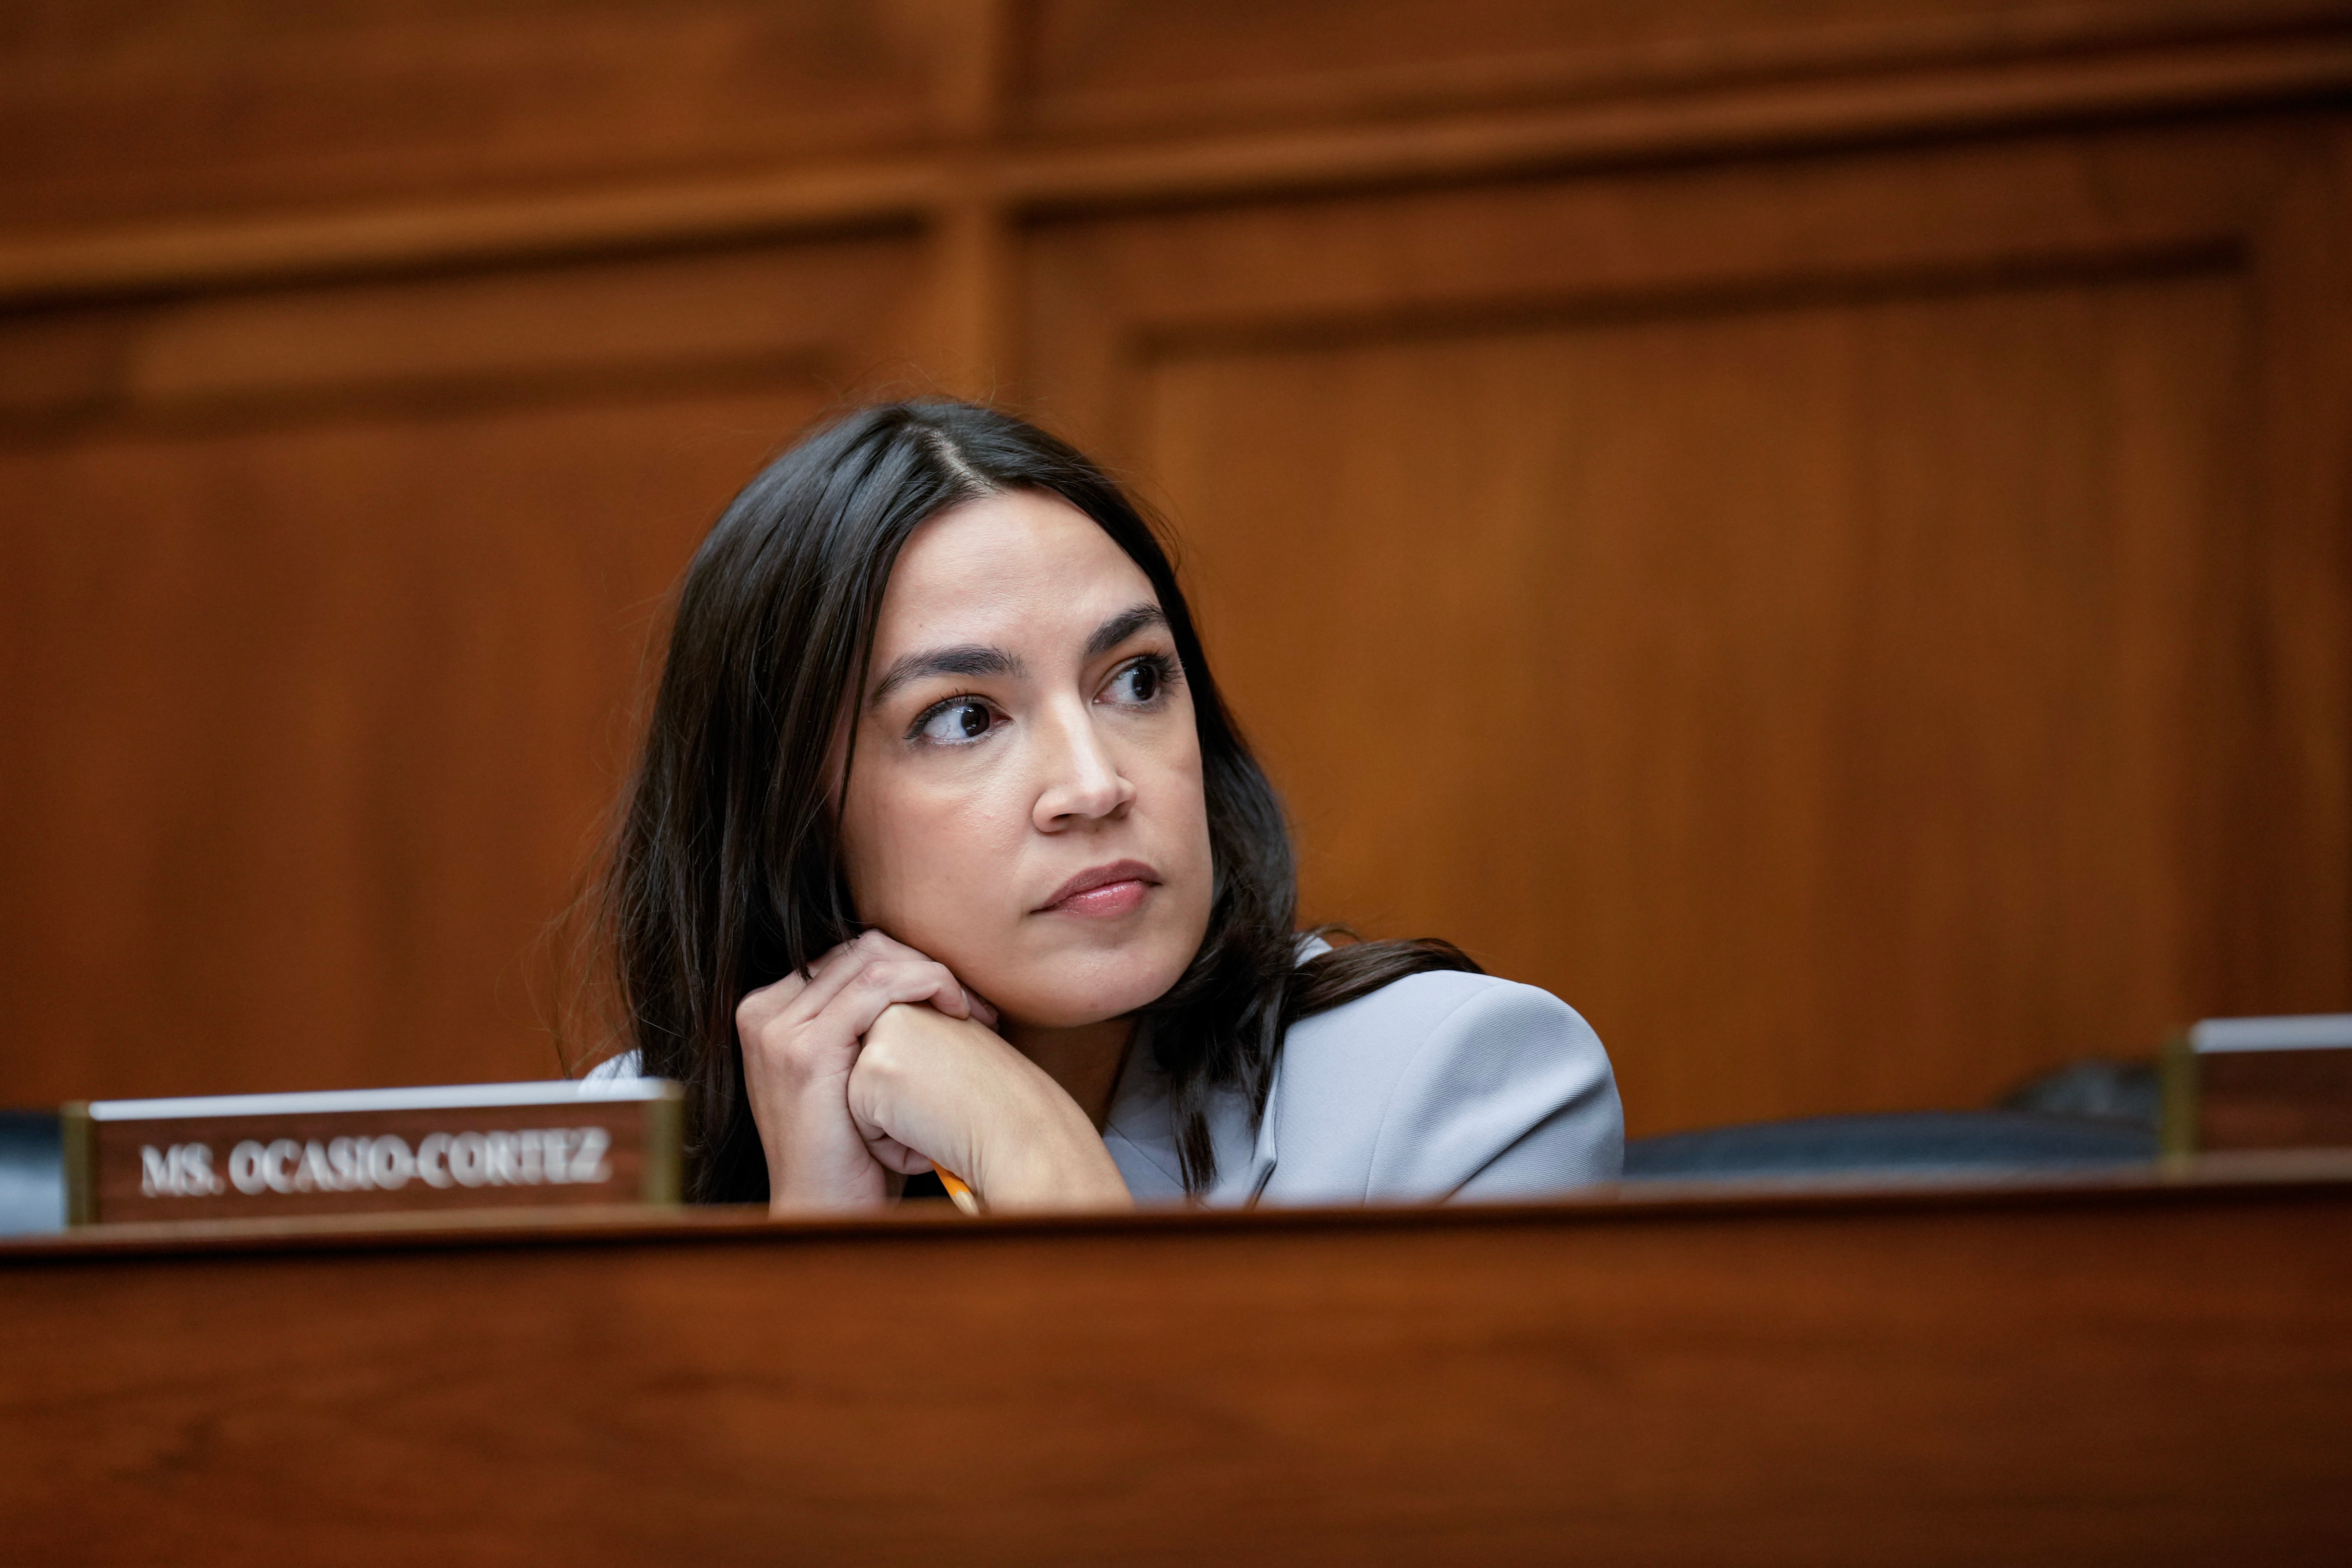 AOC told The Independent she stands in opposition to the bipartisan immigration bill released Sunday night